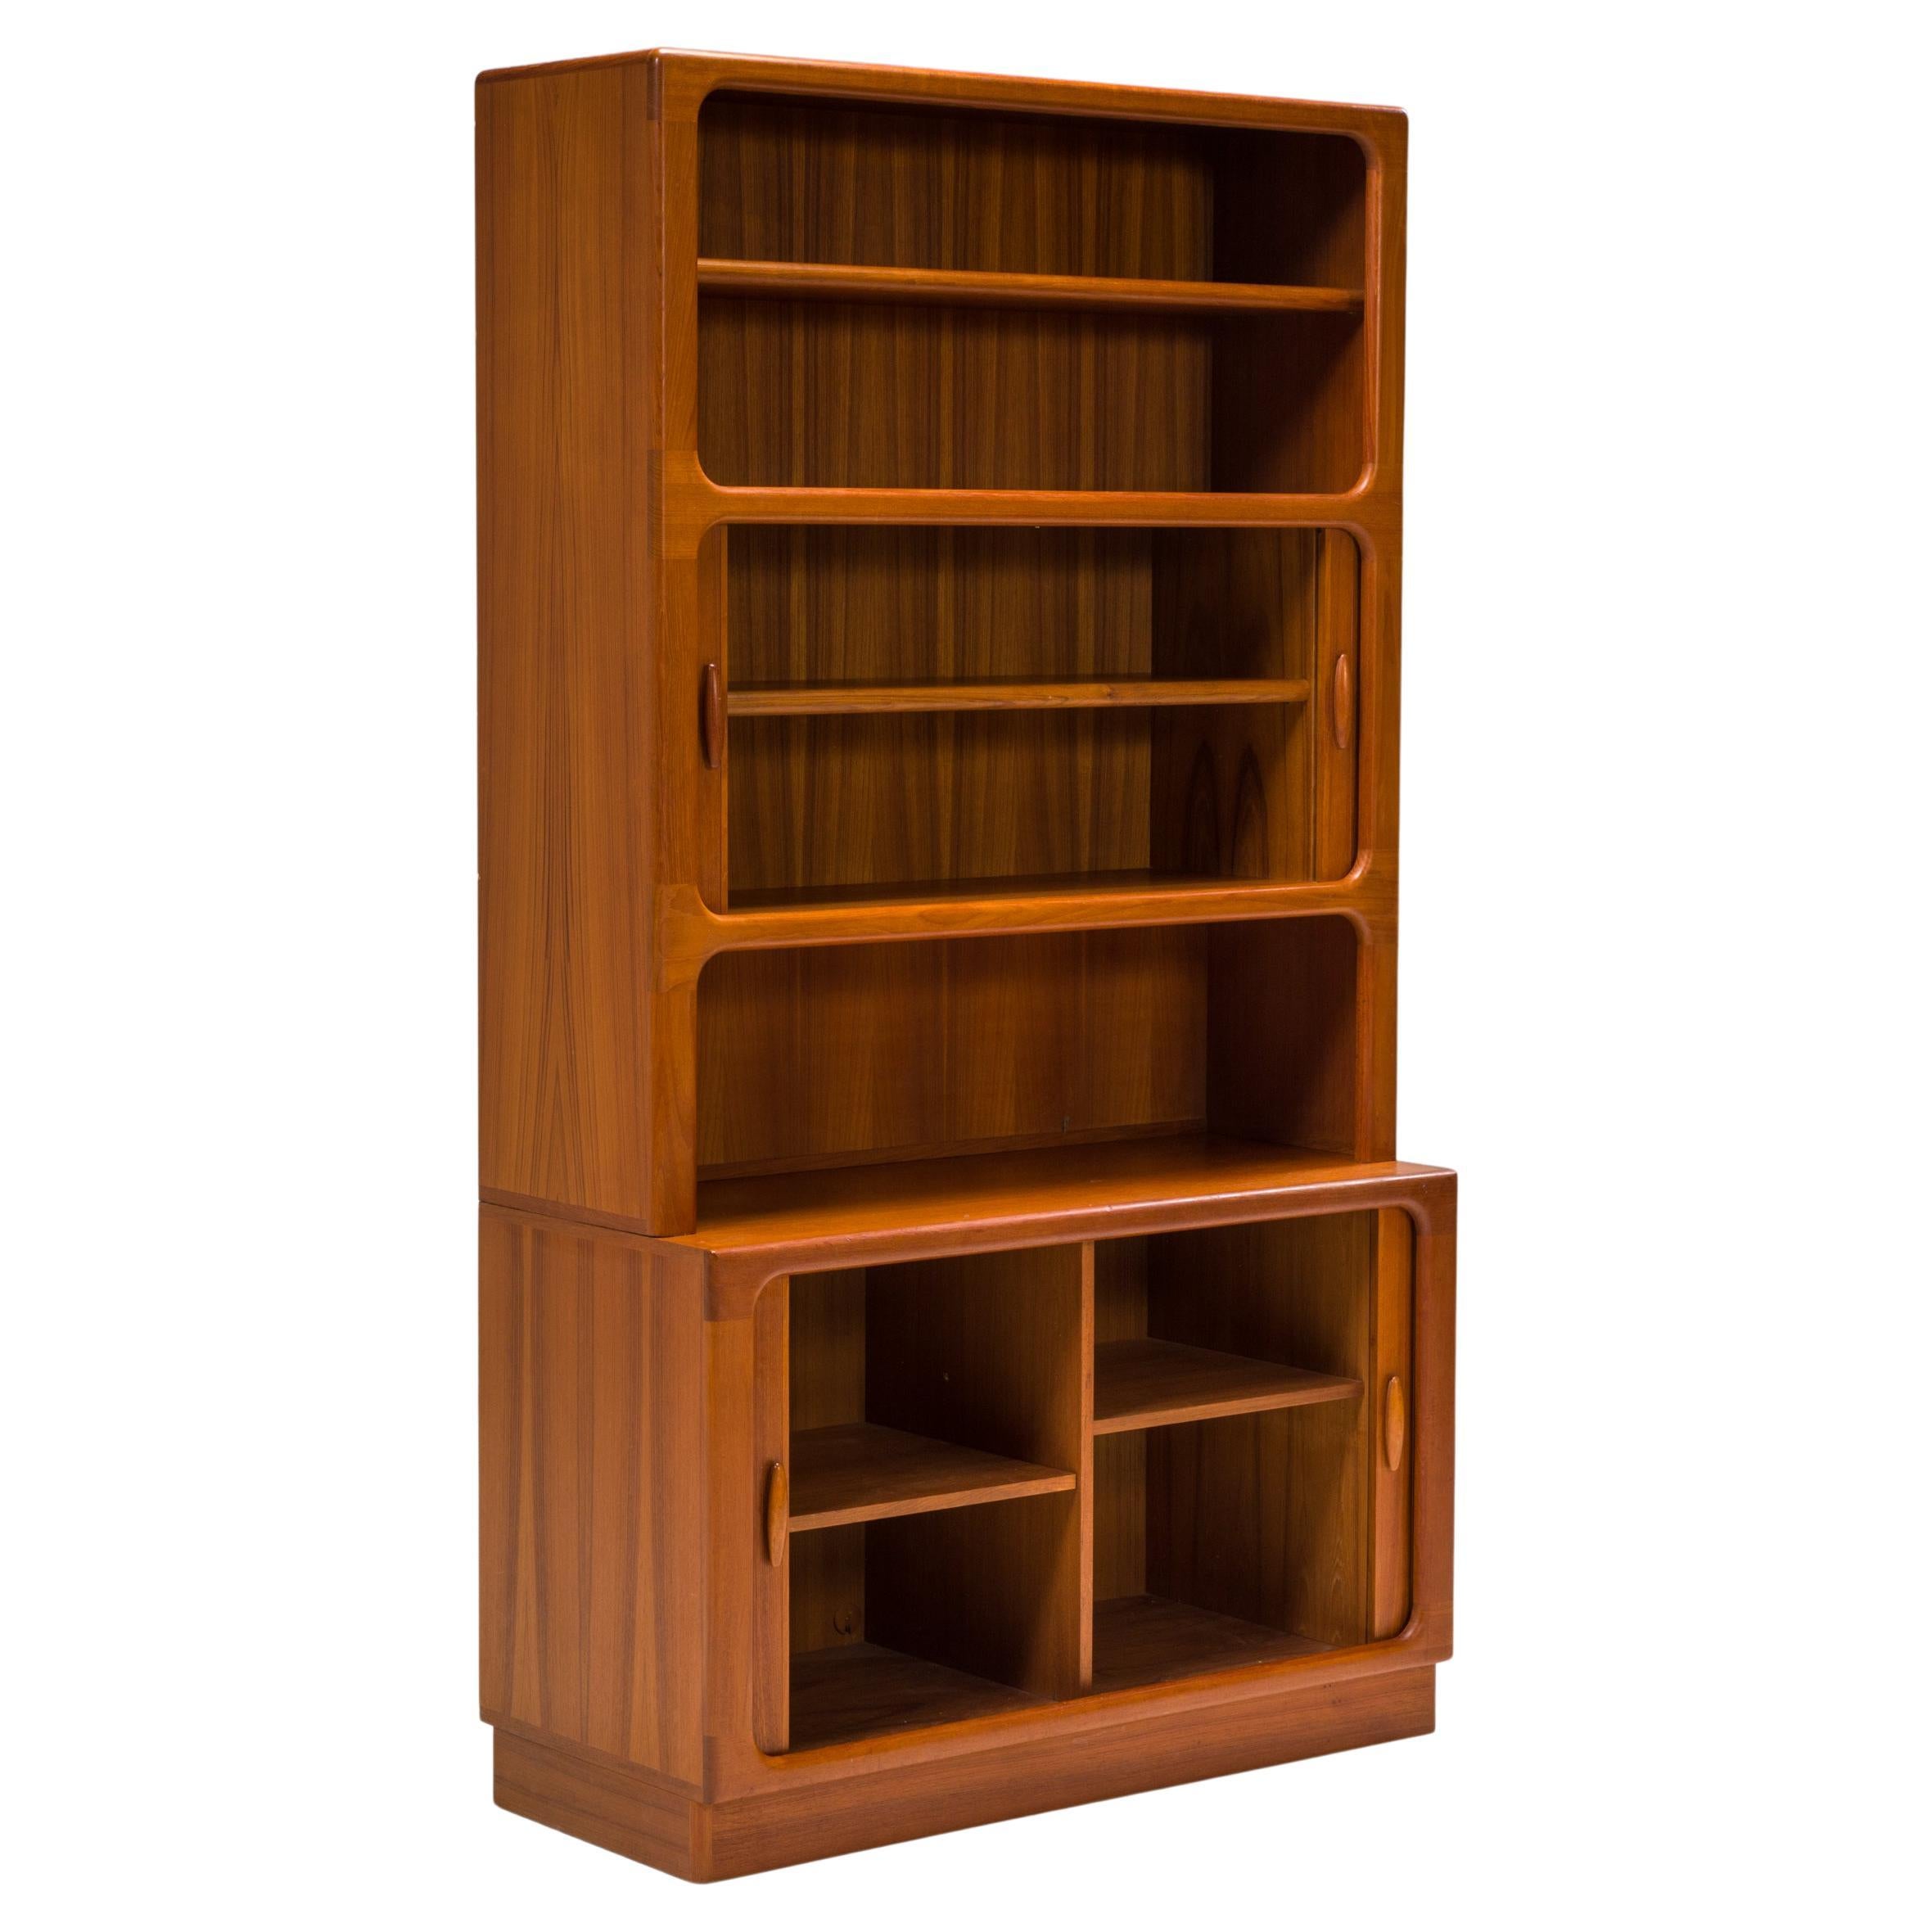 Designed and made in Denmark by Dyrlund, this cabinet is constructed from solid teak wood.

The bookshelf features a large base cupboard with two compartments, each with a shelf and closing with two tambour sliding doors.

A narrower cabinet sits on